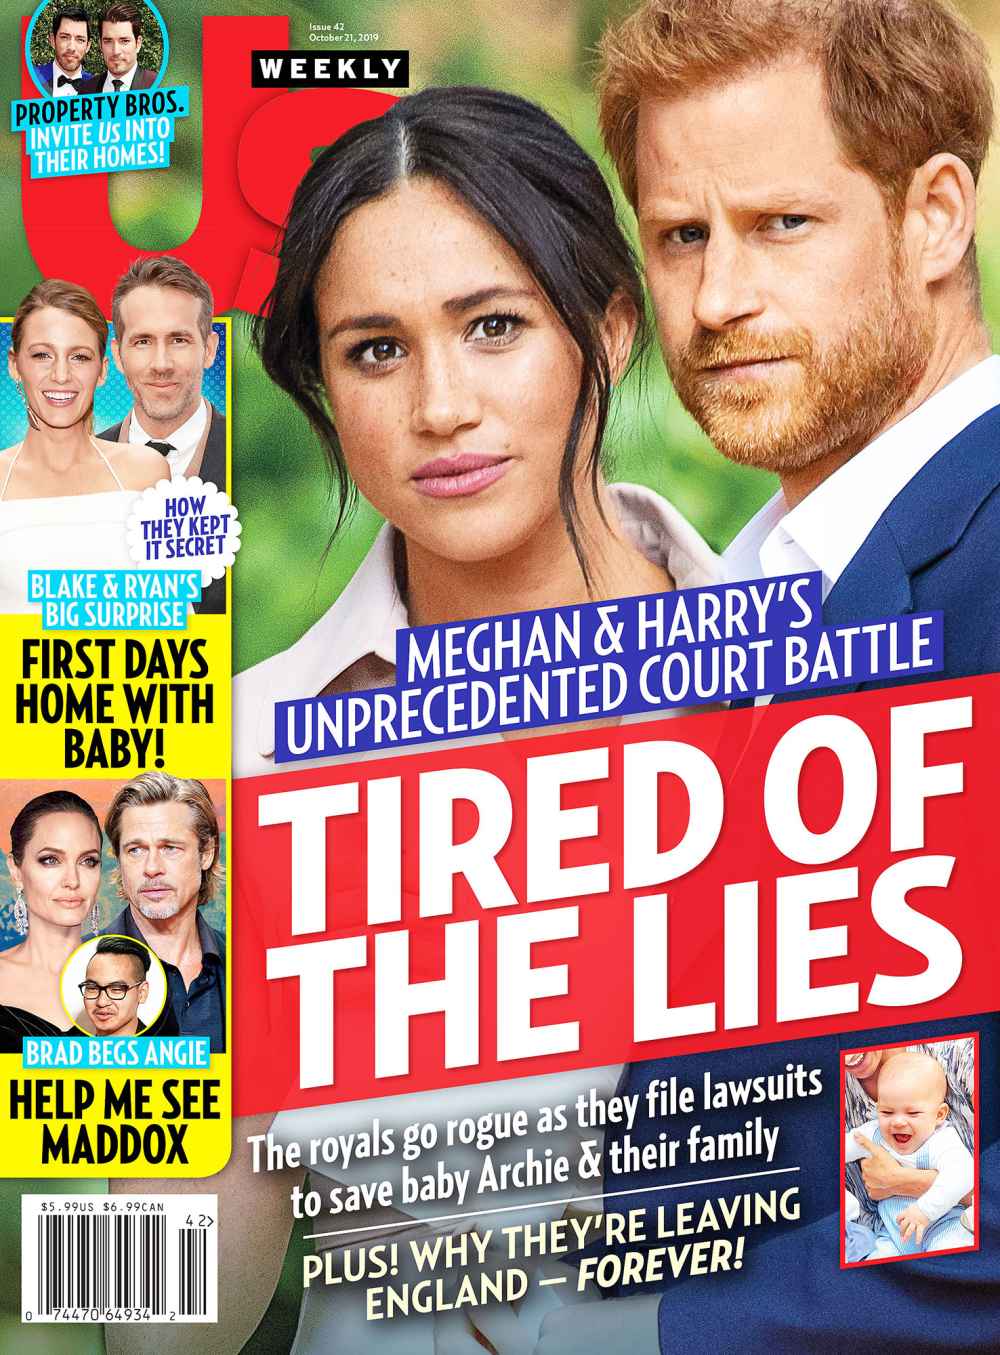 Us Weekly Cover Issue 4219 Prince William Will Be Supportive of Prince Harry's Legal Action